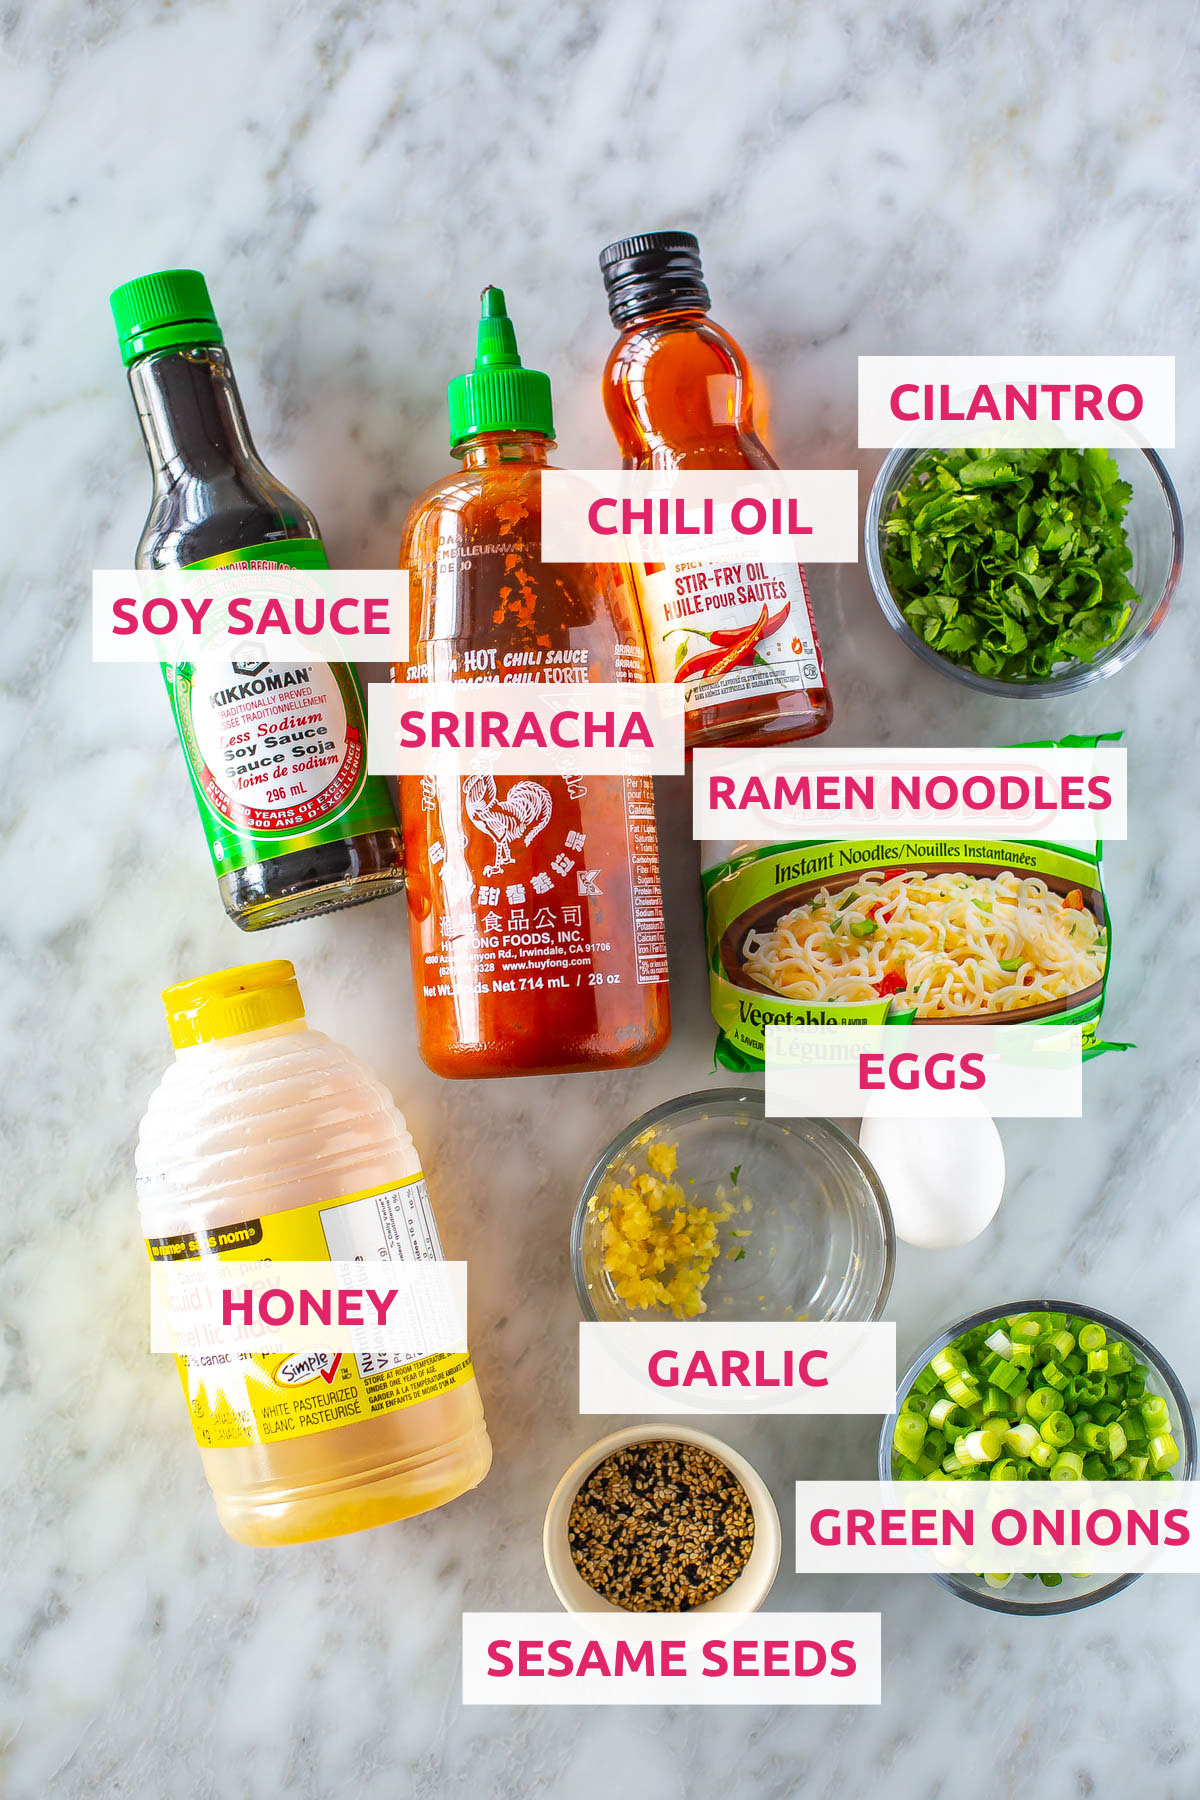 Ingredients for spicy noodles: ramen noodles, sriracha, chili oil, cilantro, soy sauce, honey, garlic, green onions and sesame seeds.